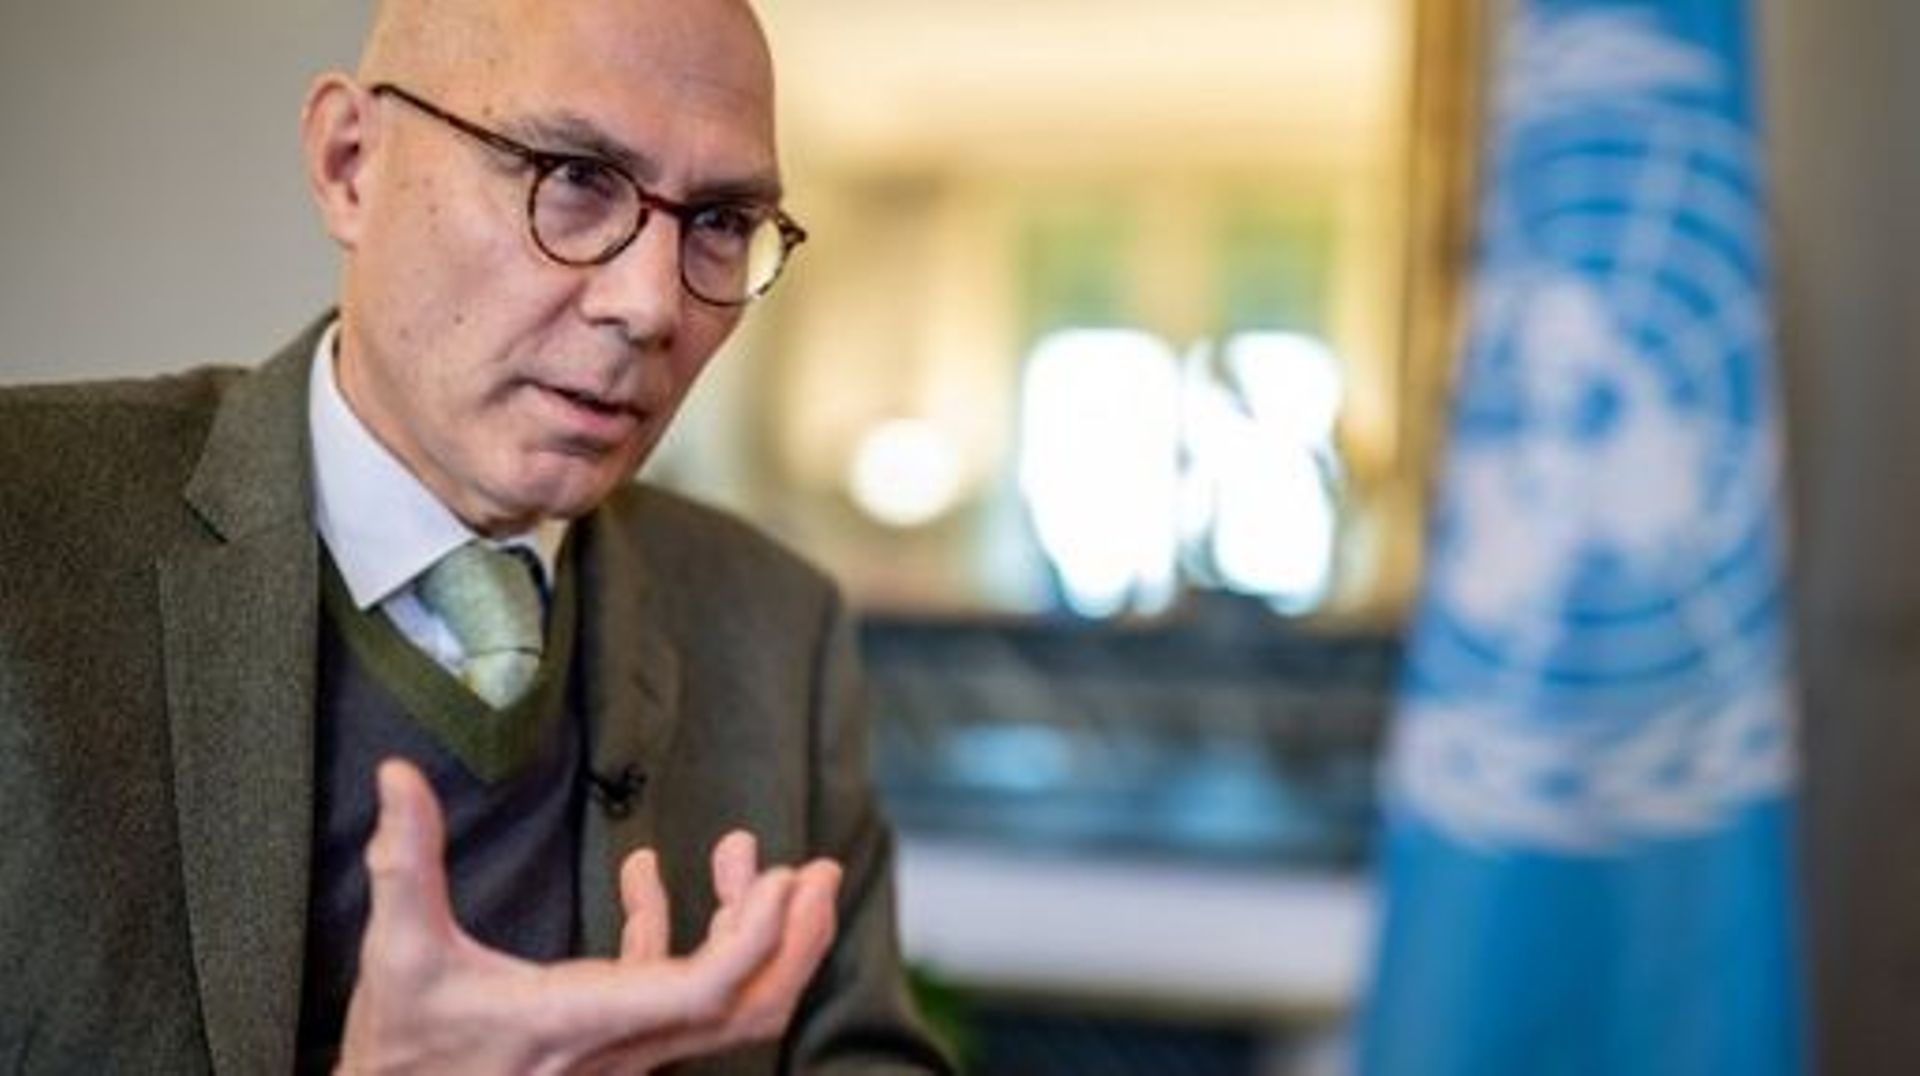 United Nations (UN) High Commissioner for Human Rights Volker Turk answers AFP journalists' questions during an interview at his office, in Geneva, on January 4, 2023. From Afghanistan and Iran to rampant misogynistic vitriol online, the UN rights chief w